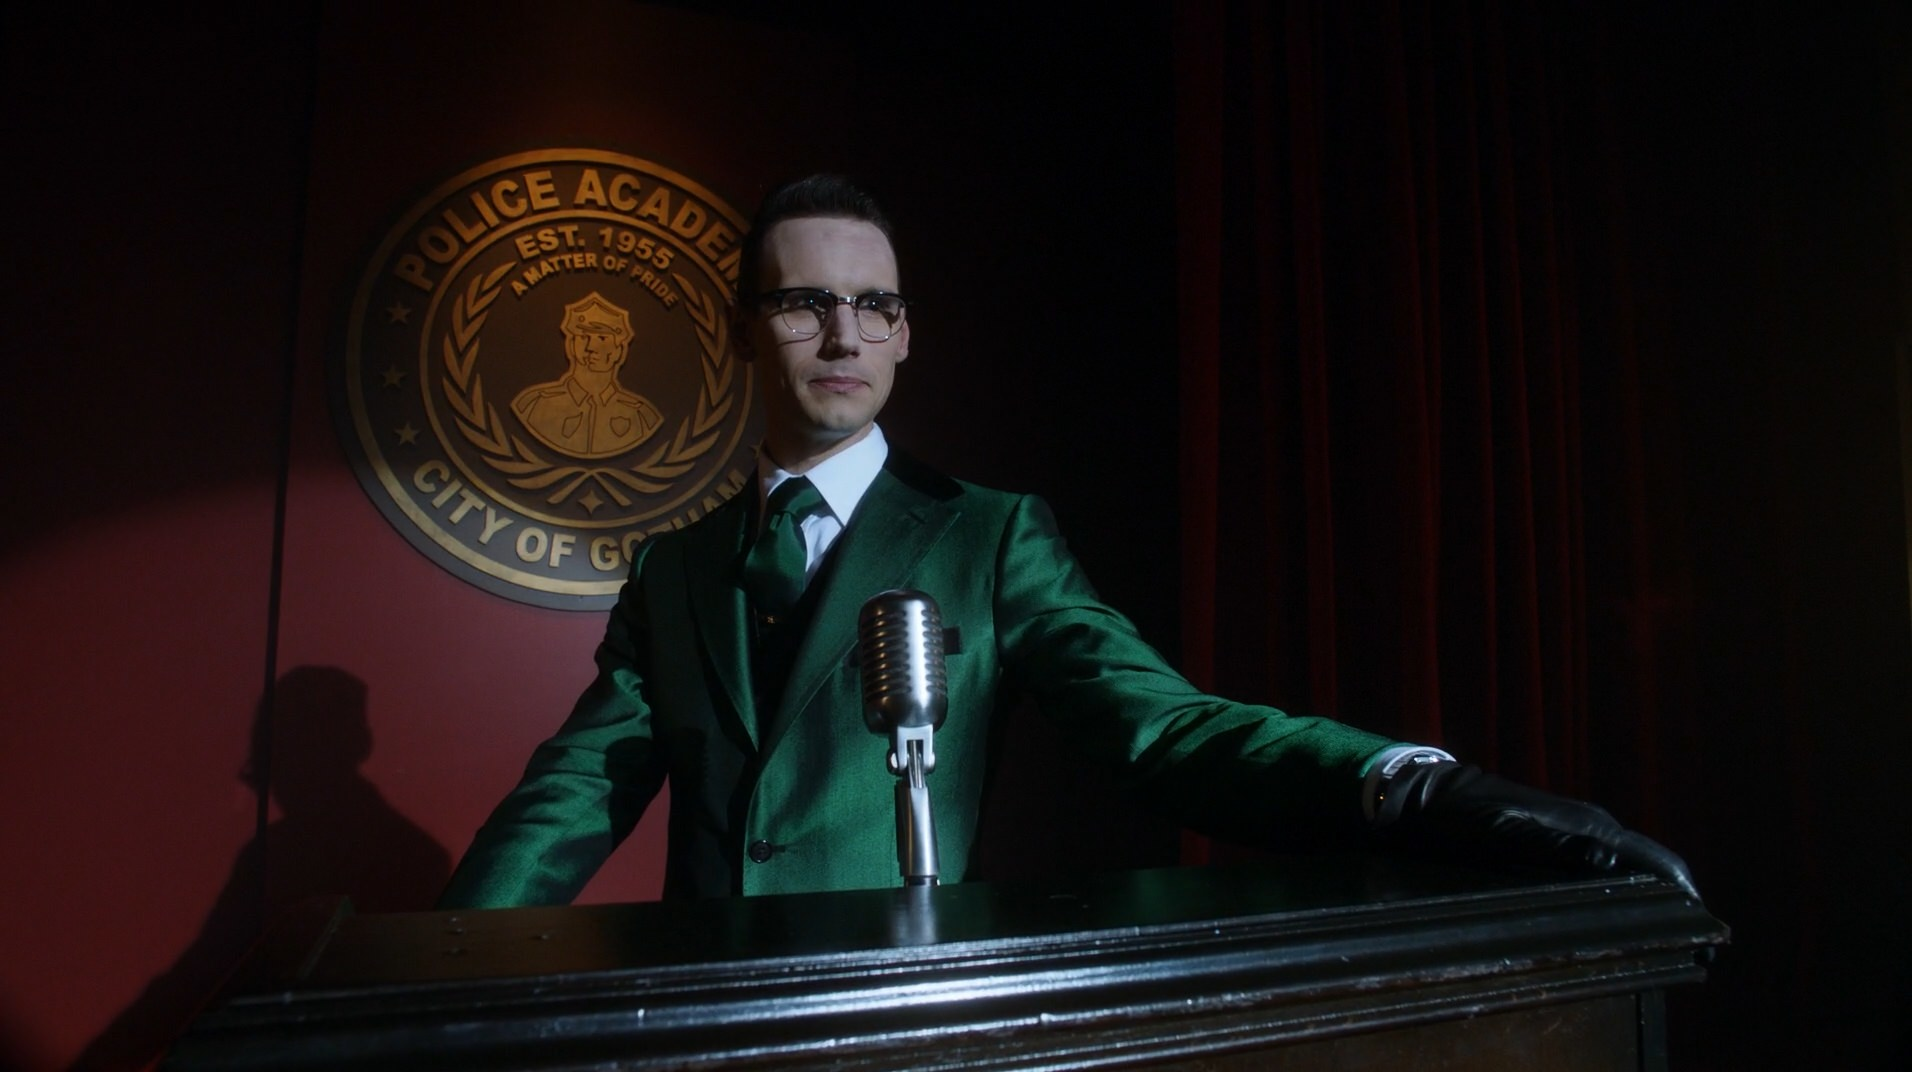 Heroes Rise: How the Riddler Got His Name | Gotham Wiki | FANDOM powered by Wikia